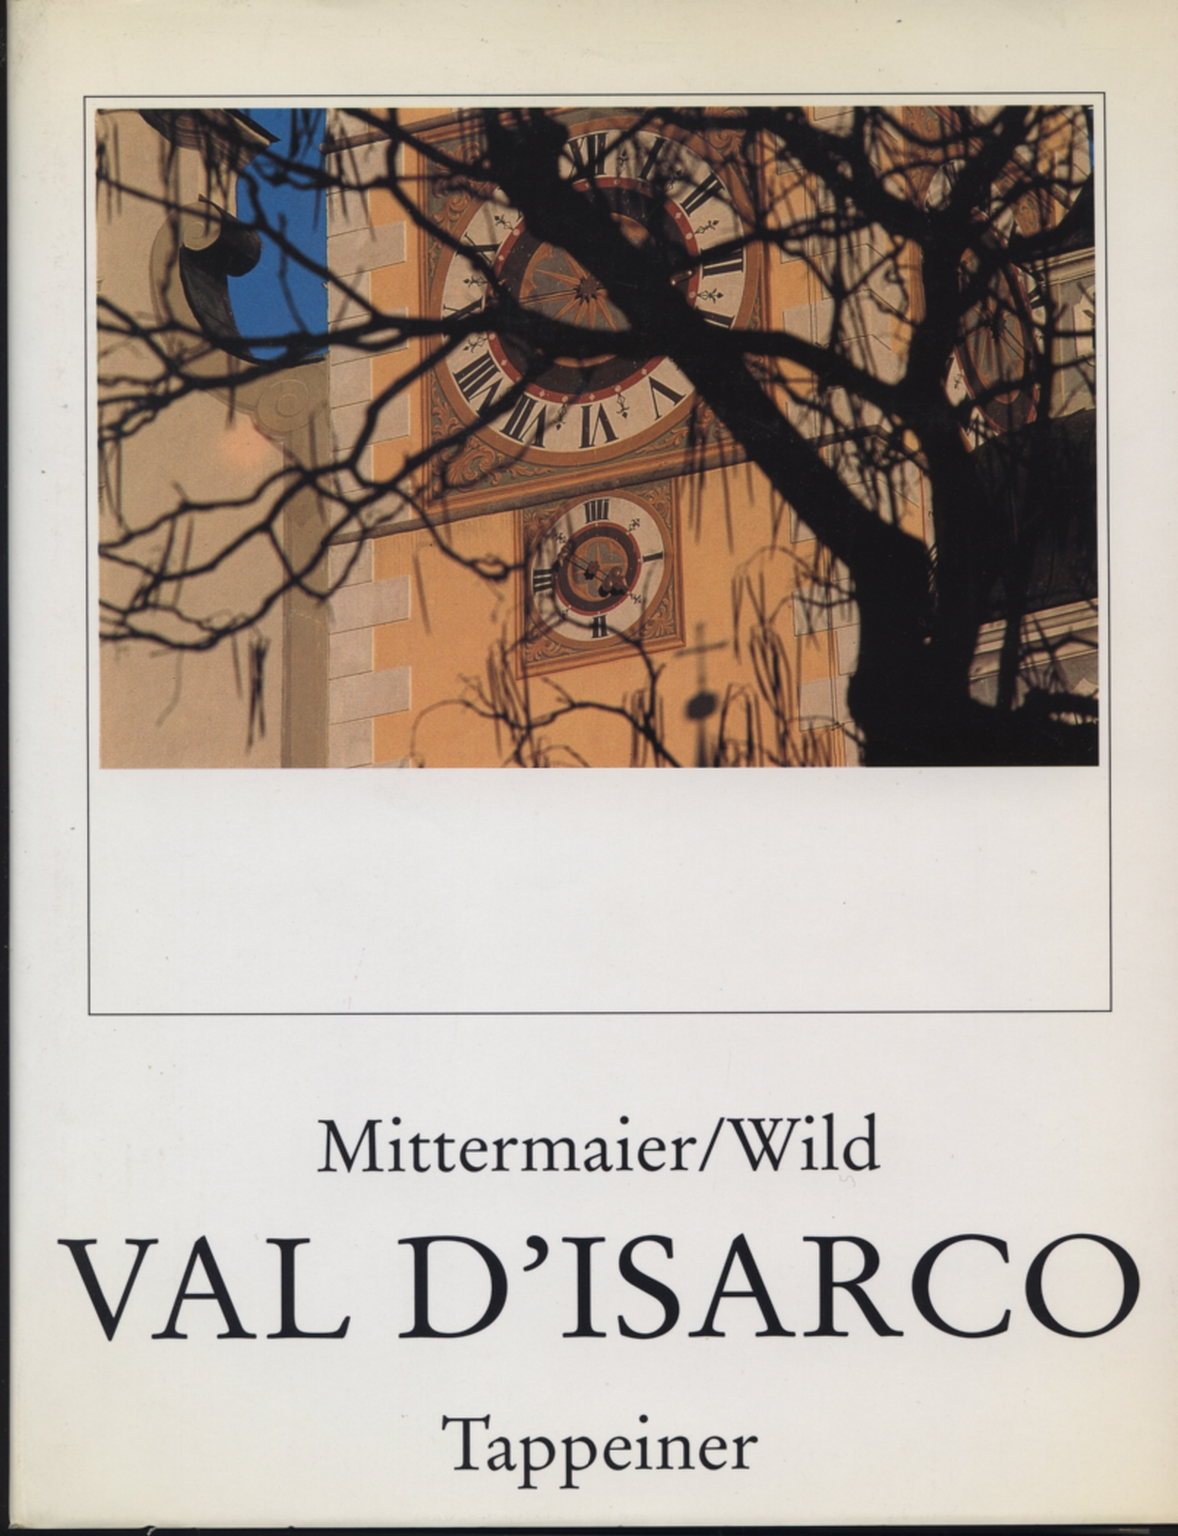 Val D'Isarco, Karl Mittermaier Carla Wild